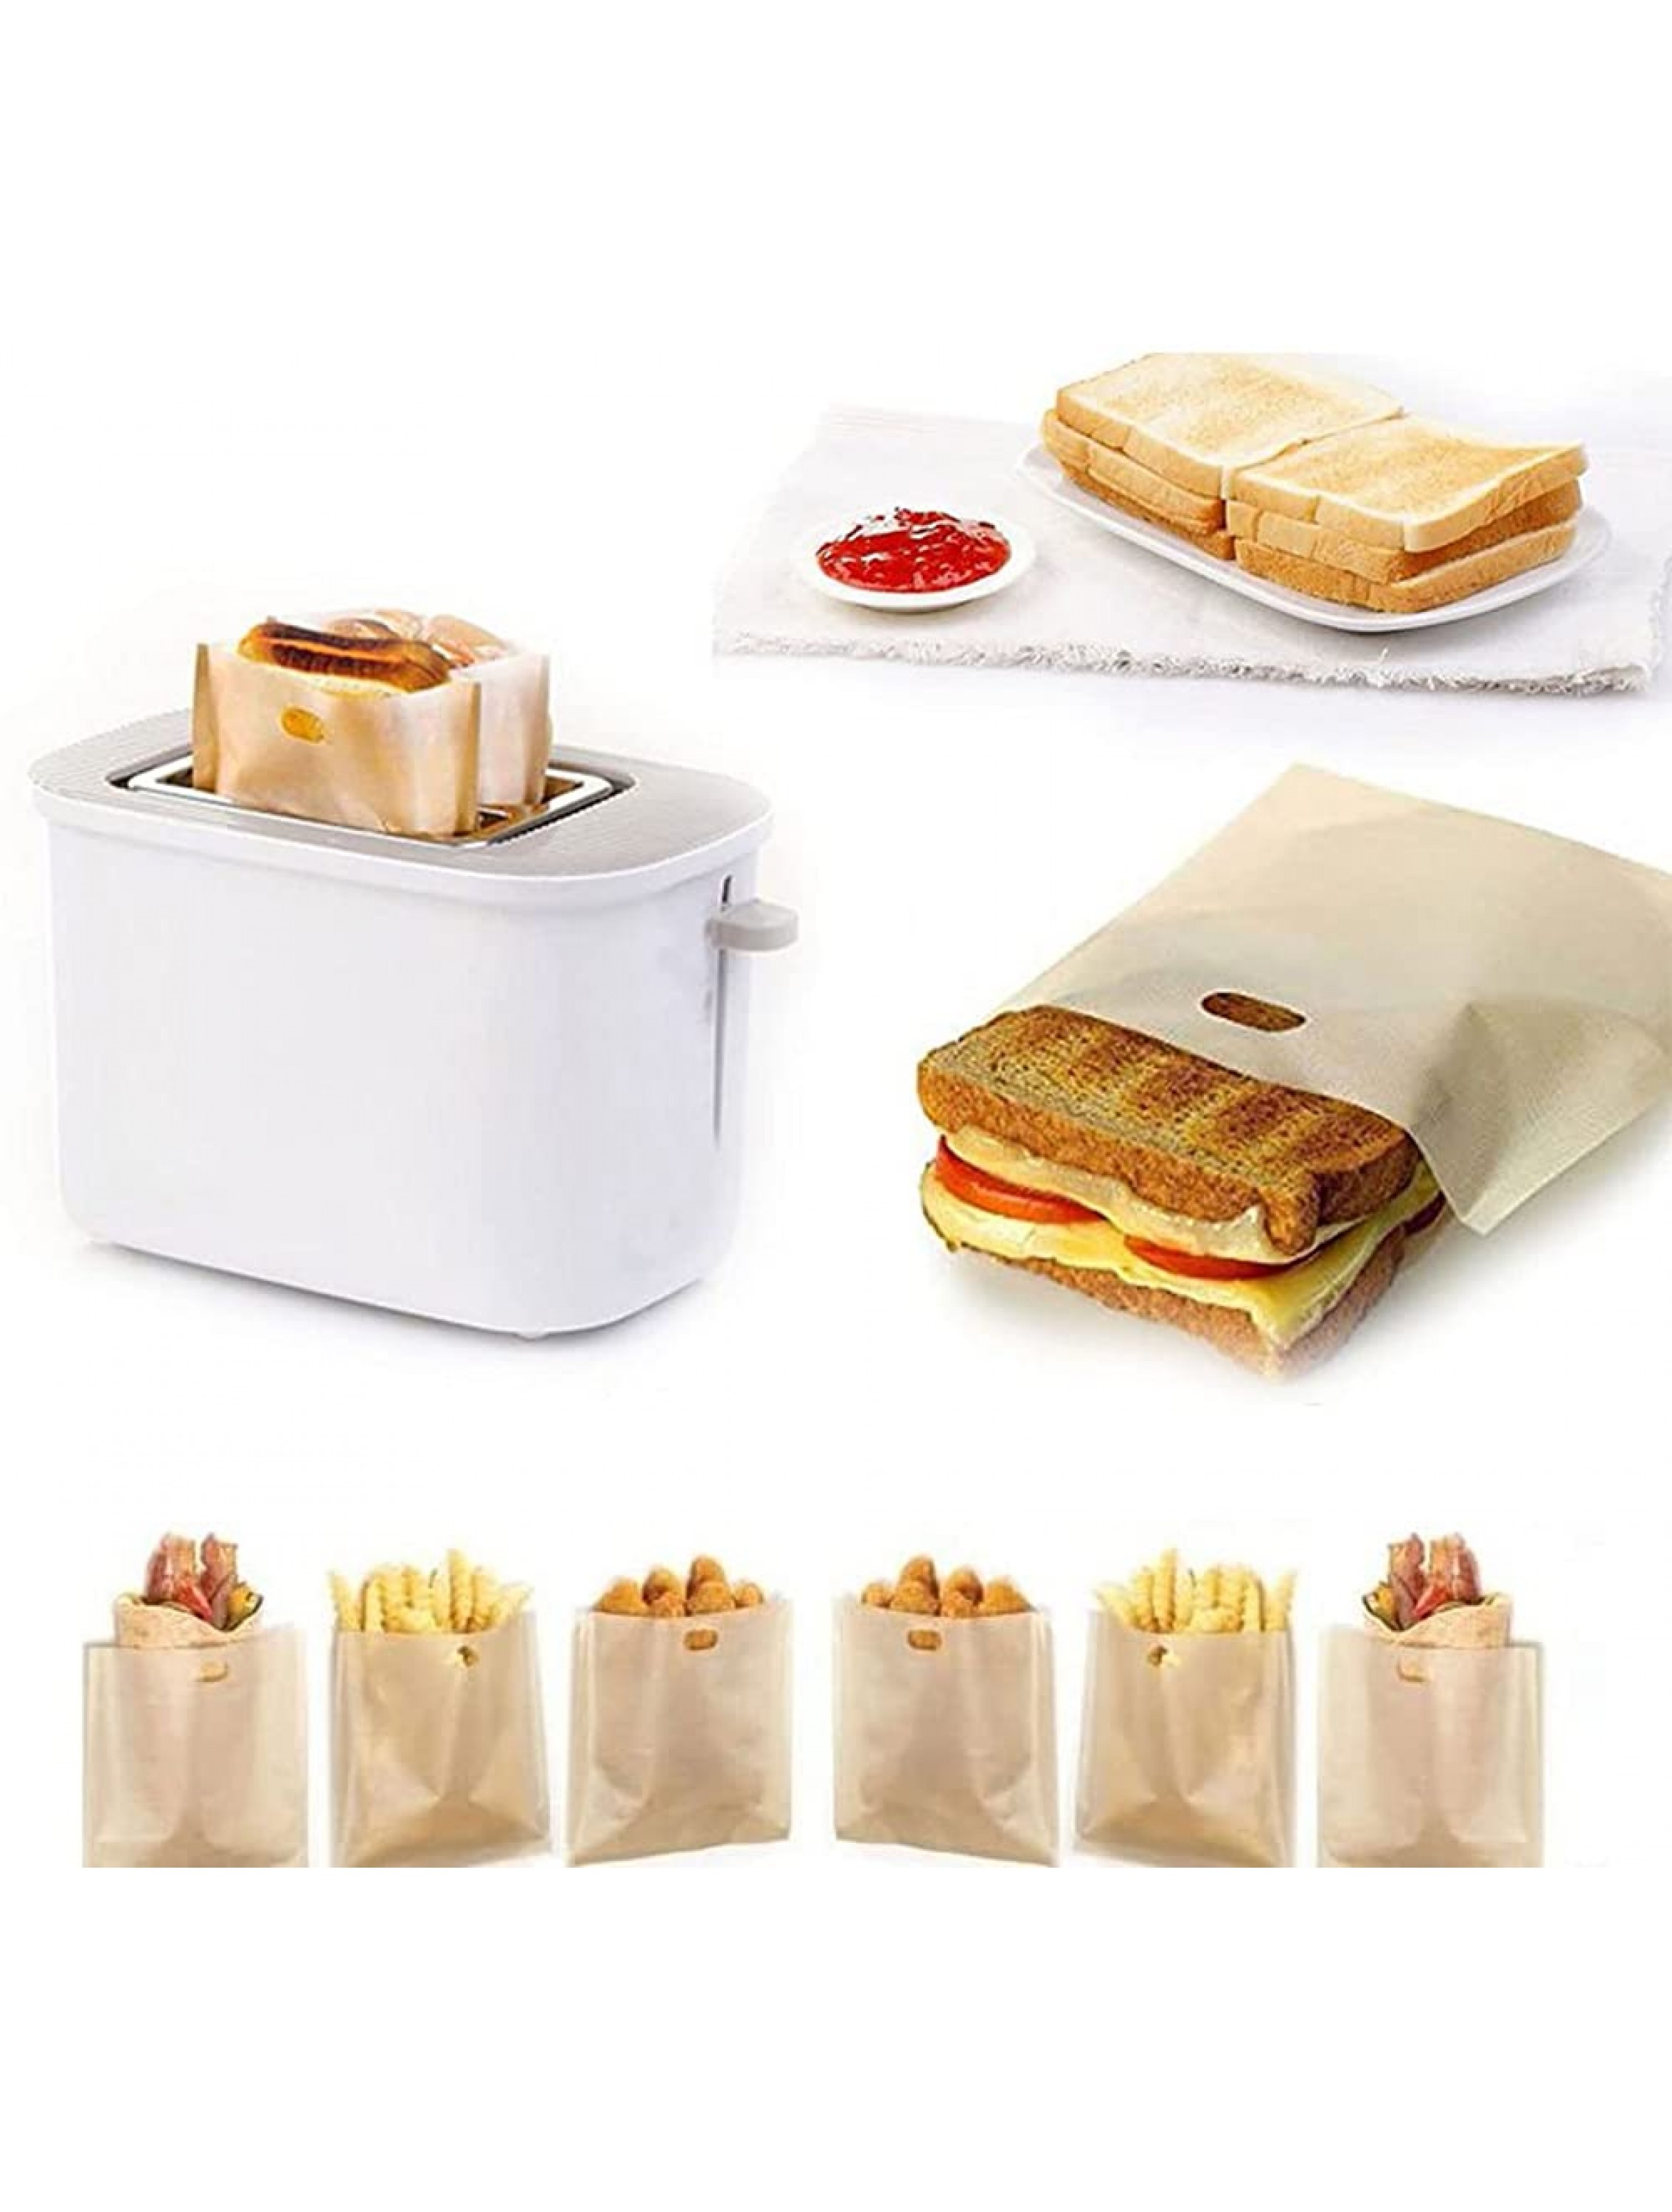 Toaster Bag Pack 10,Non Stick Toaster Bags Reusable and Heat Resistant Easy to Clean,Perfect for Grilled Cheese Sandwiches 16X16.5CM - BEBTITY7Q